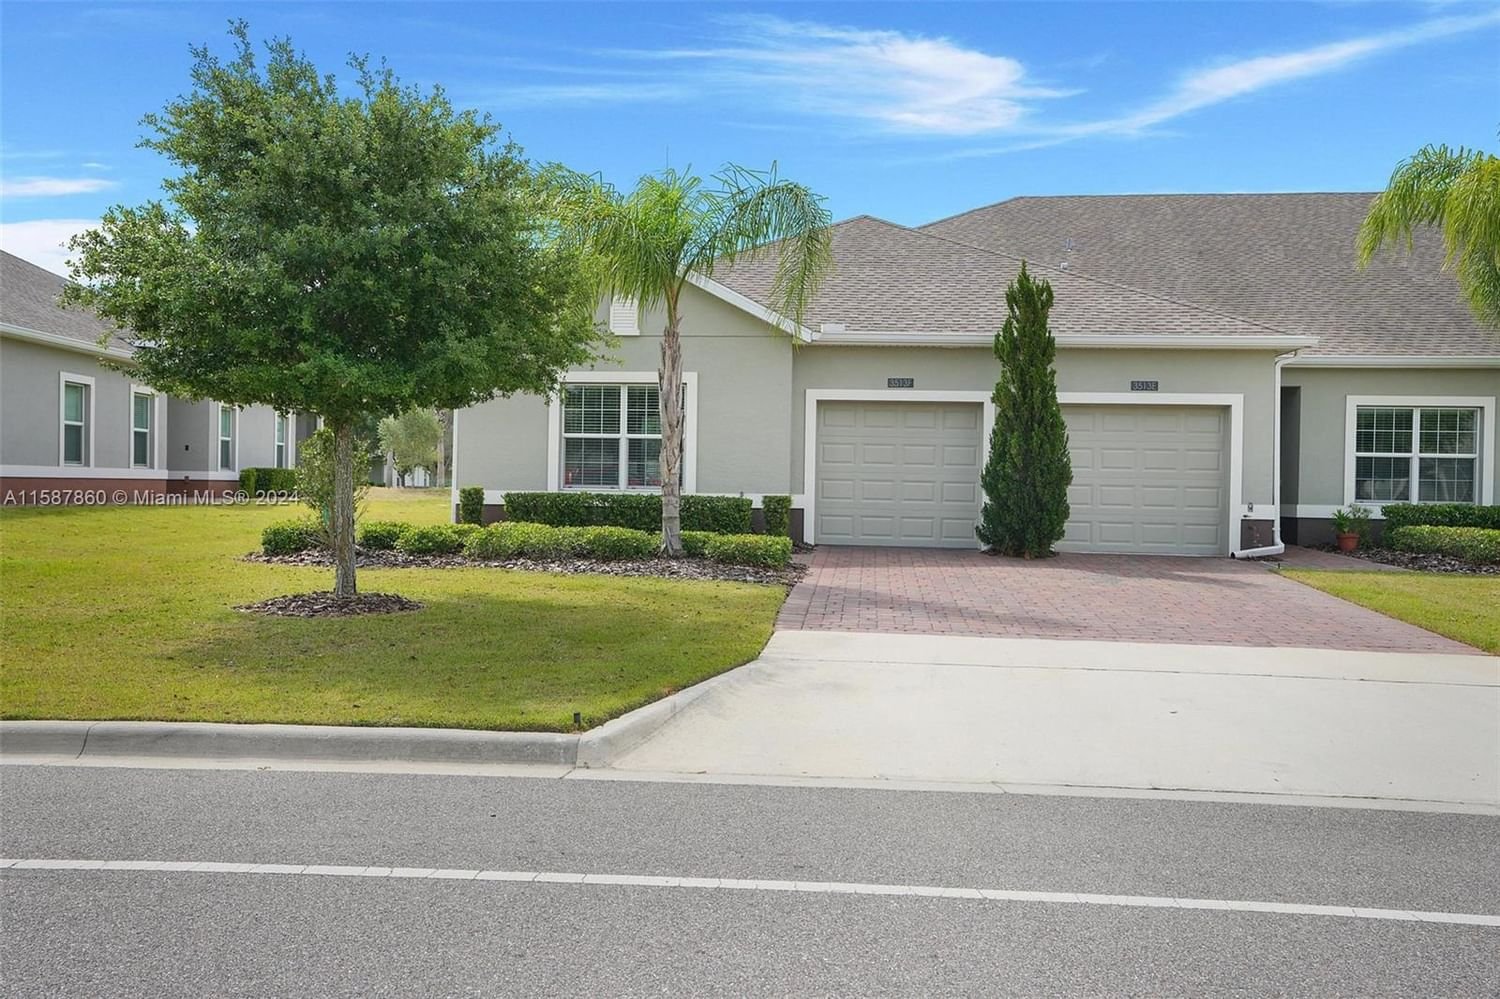 Real estate property located at 3513 Belland Circle, Lake County, Heritage Hills, Clermont, FL